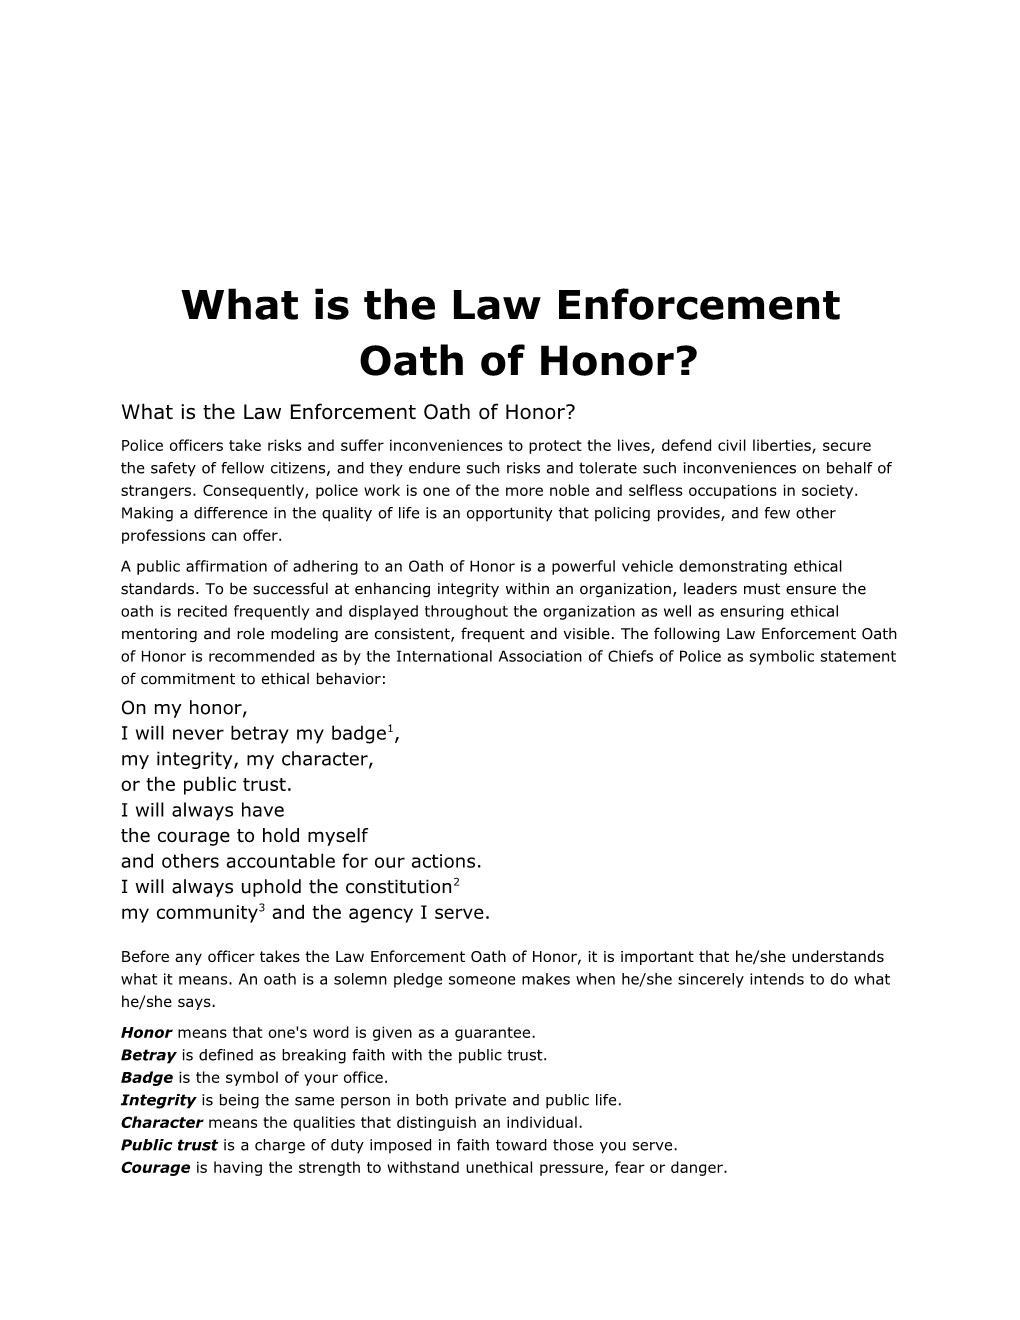 What Is the Law Enforcement Oath of Honor?